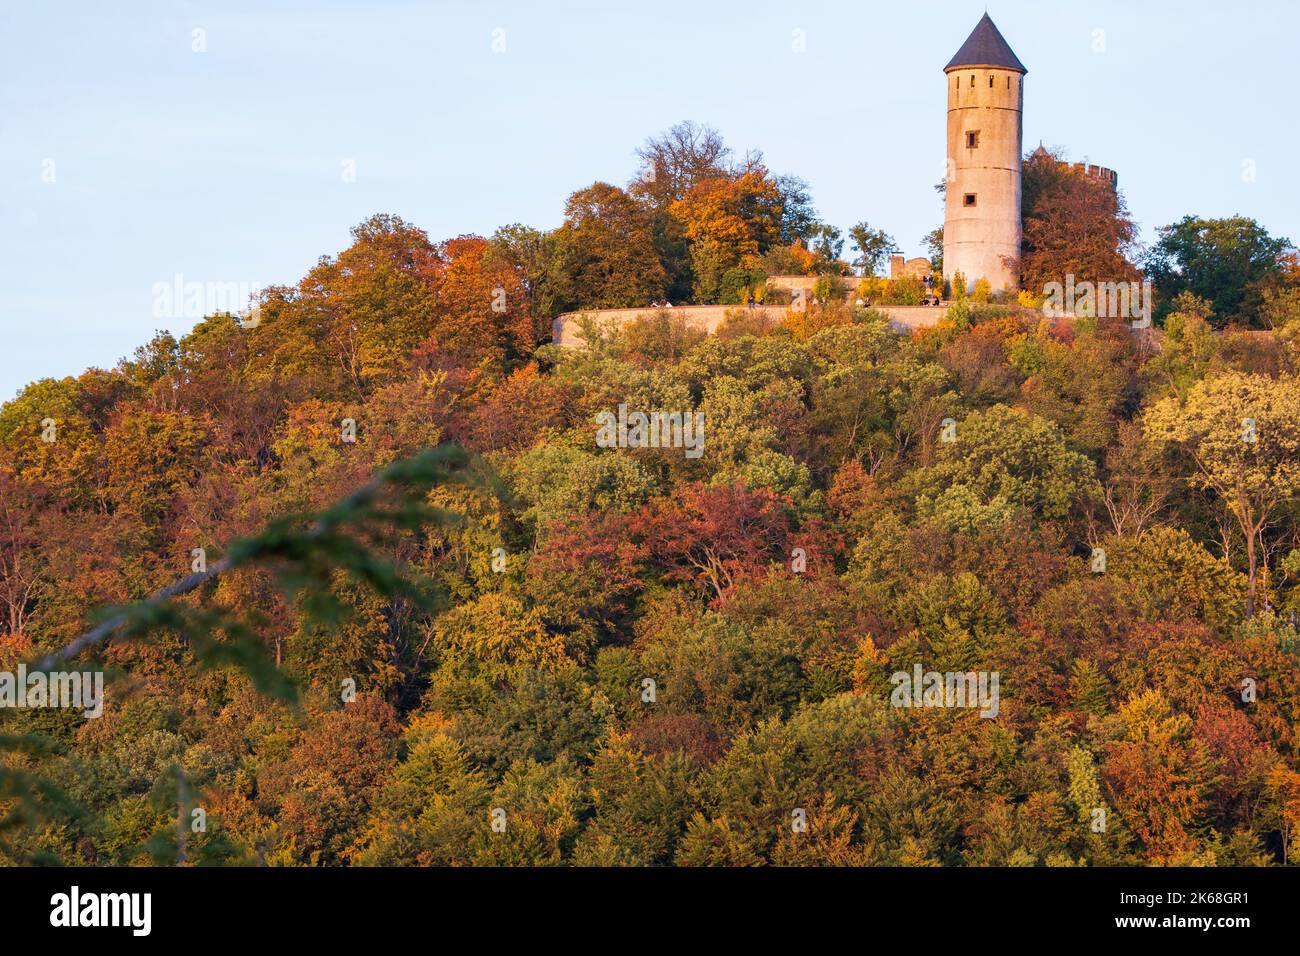 Medieval castle ruins on a mountain in the autumn forest, Plesse Burg in Germany Stock Photo